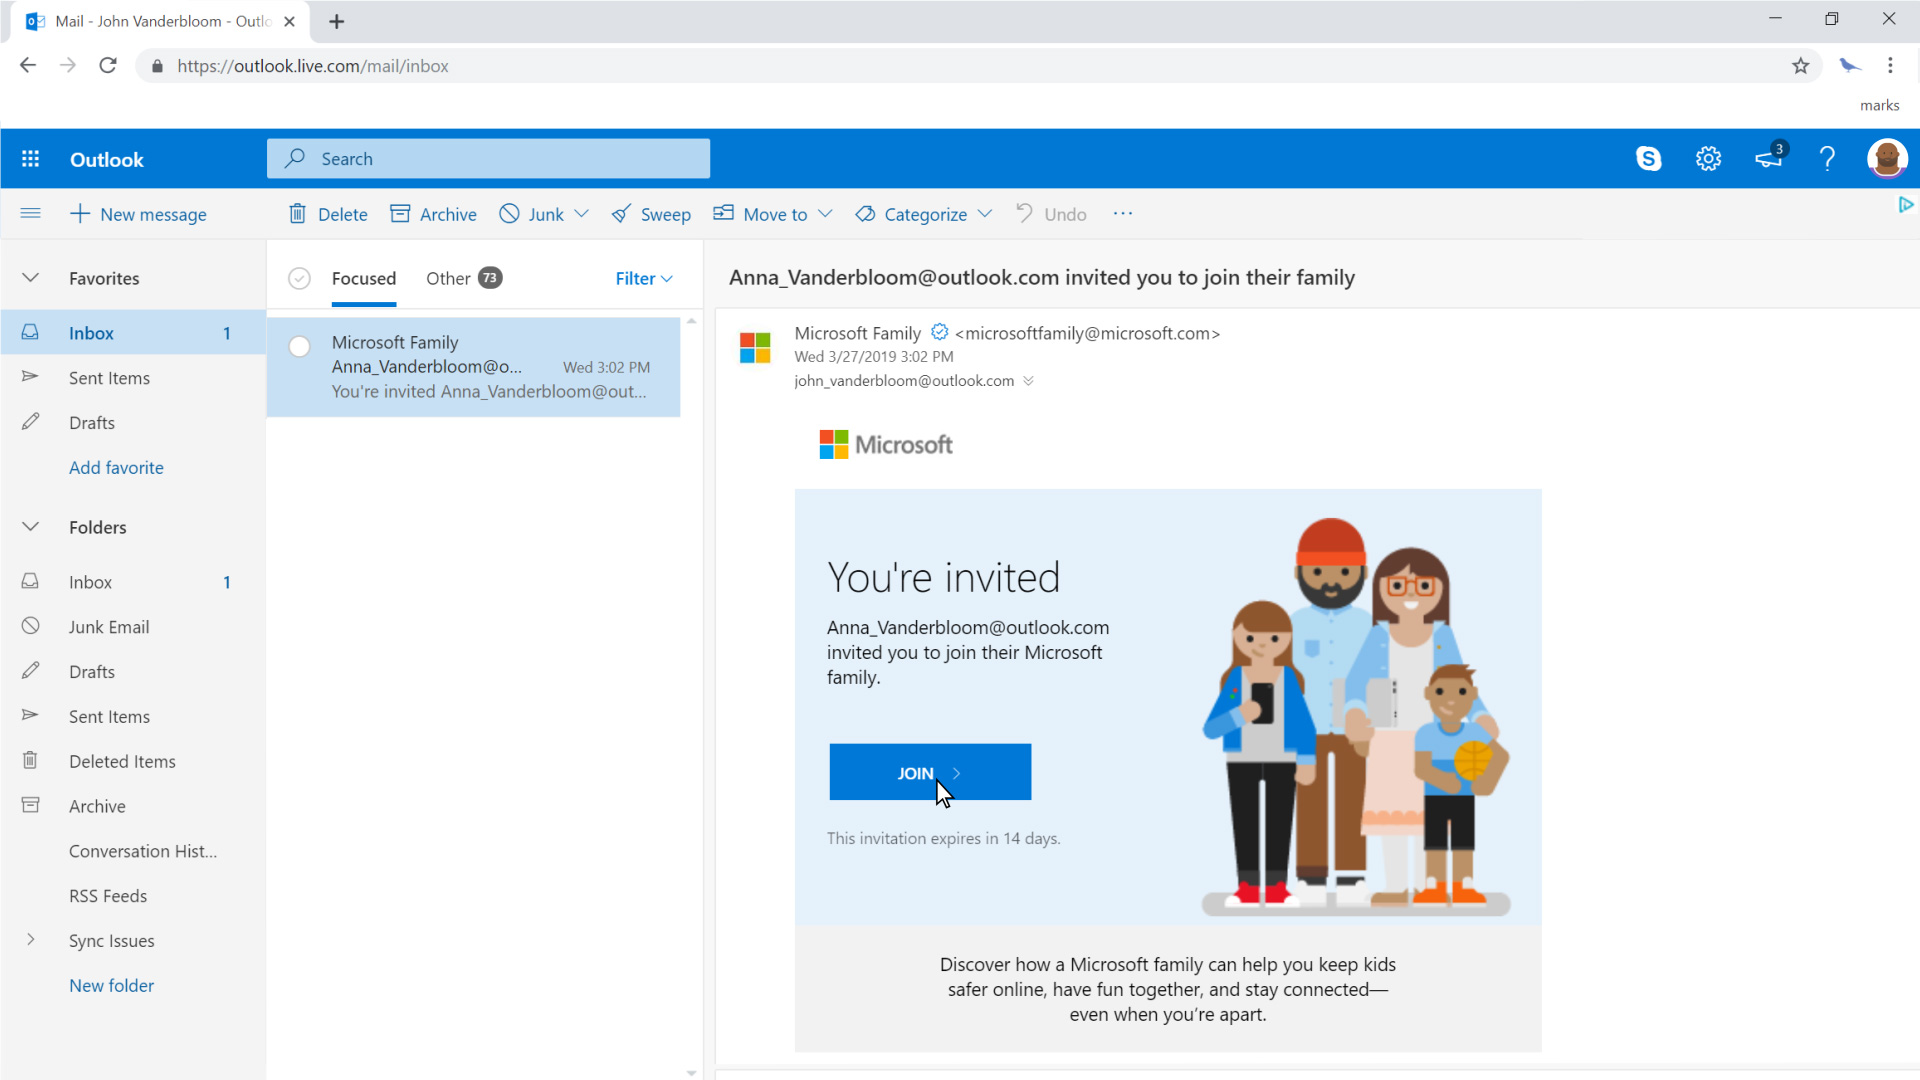 Video: Share Microsoft 365 with your family - Microsoft Support